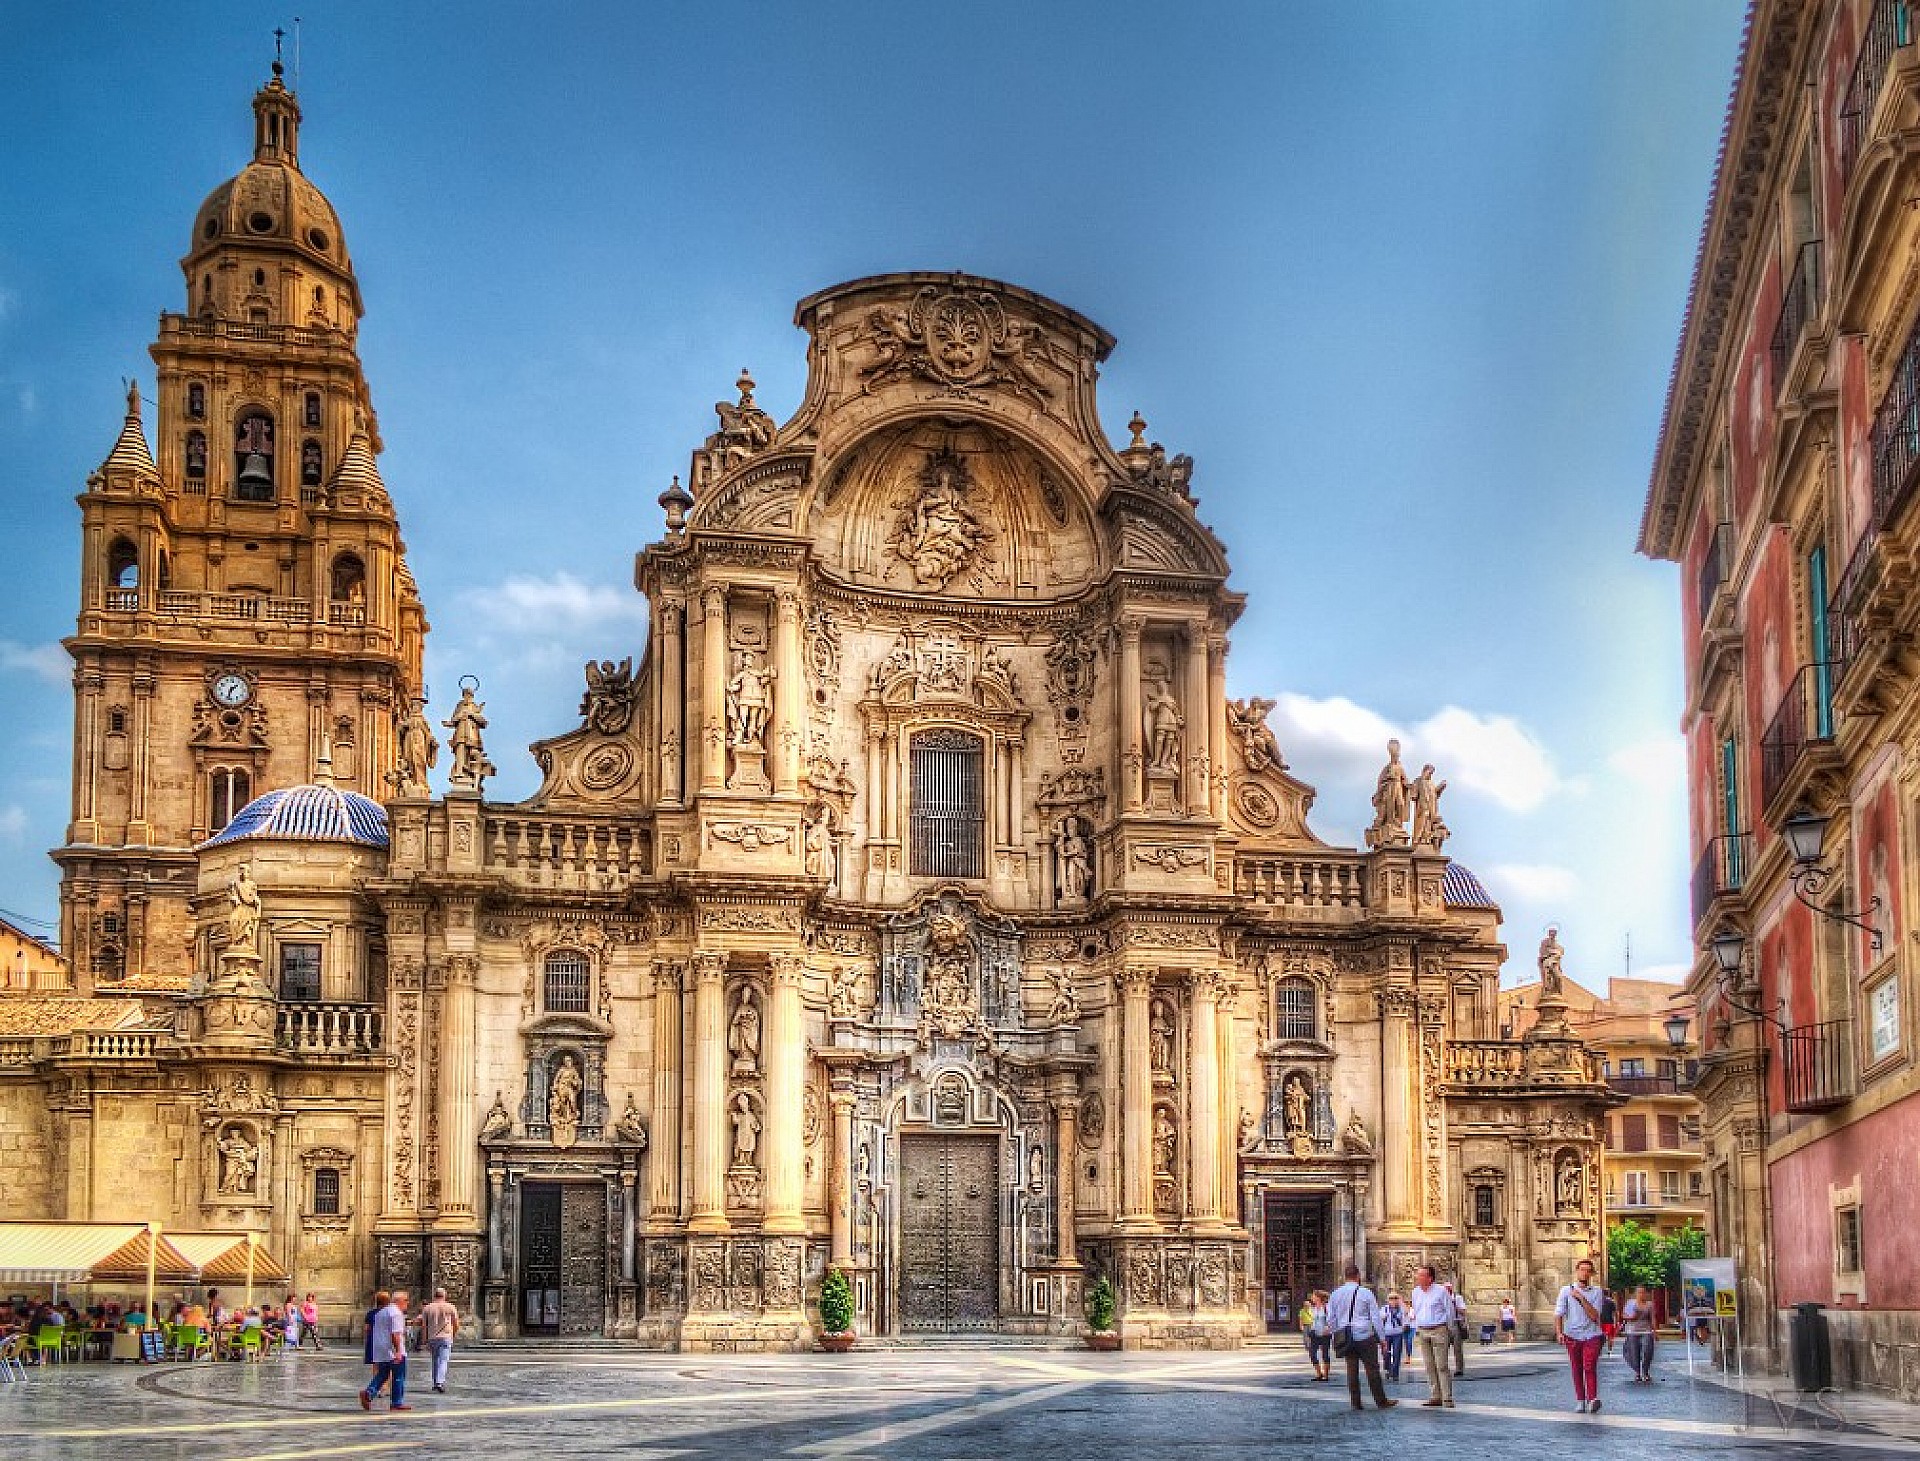 The famous Cathedral in Murcia